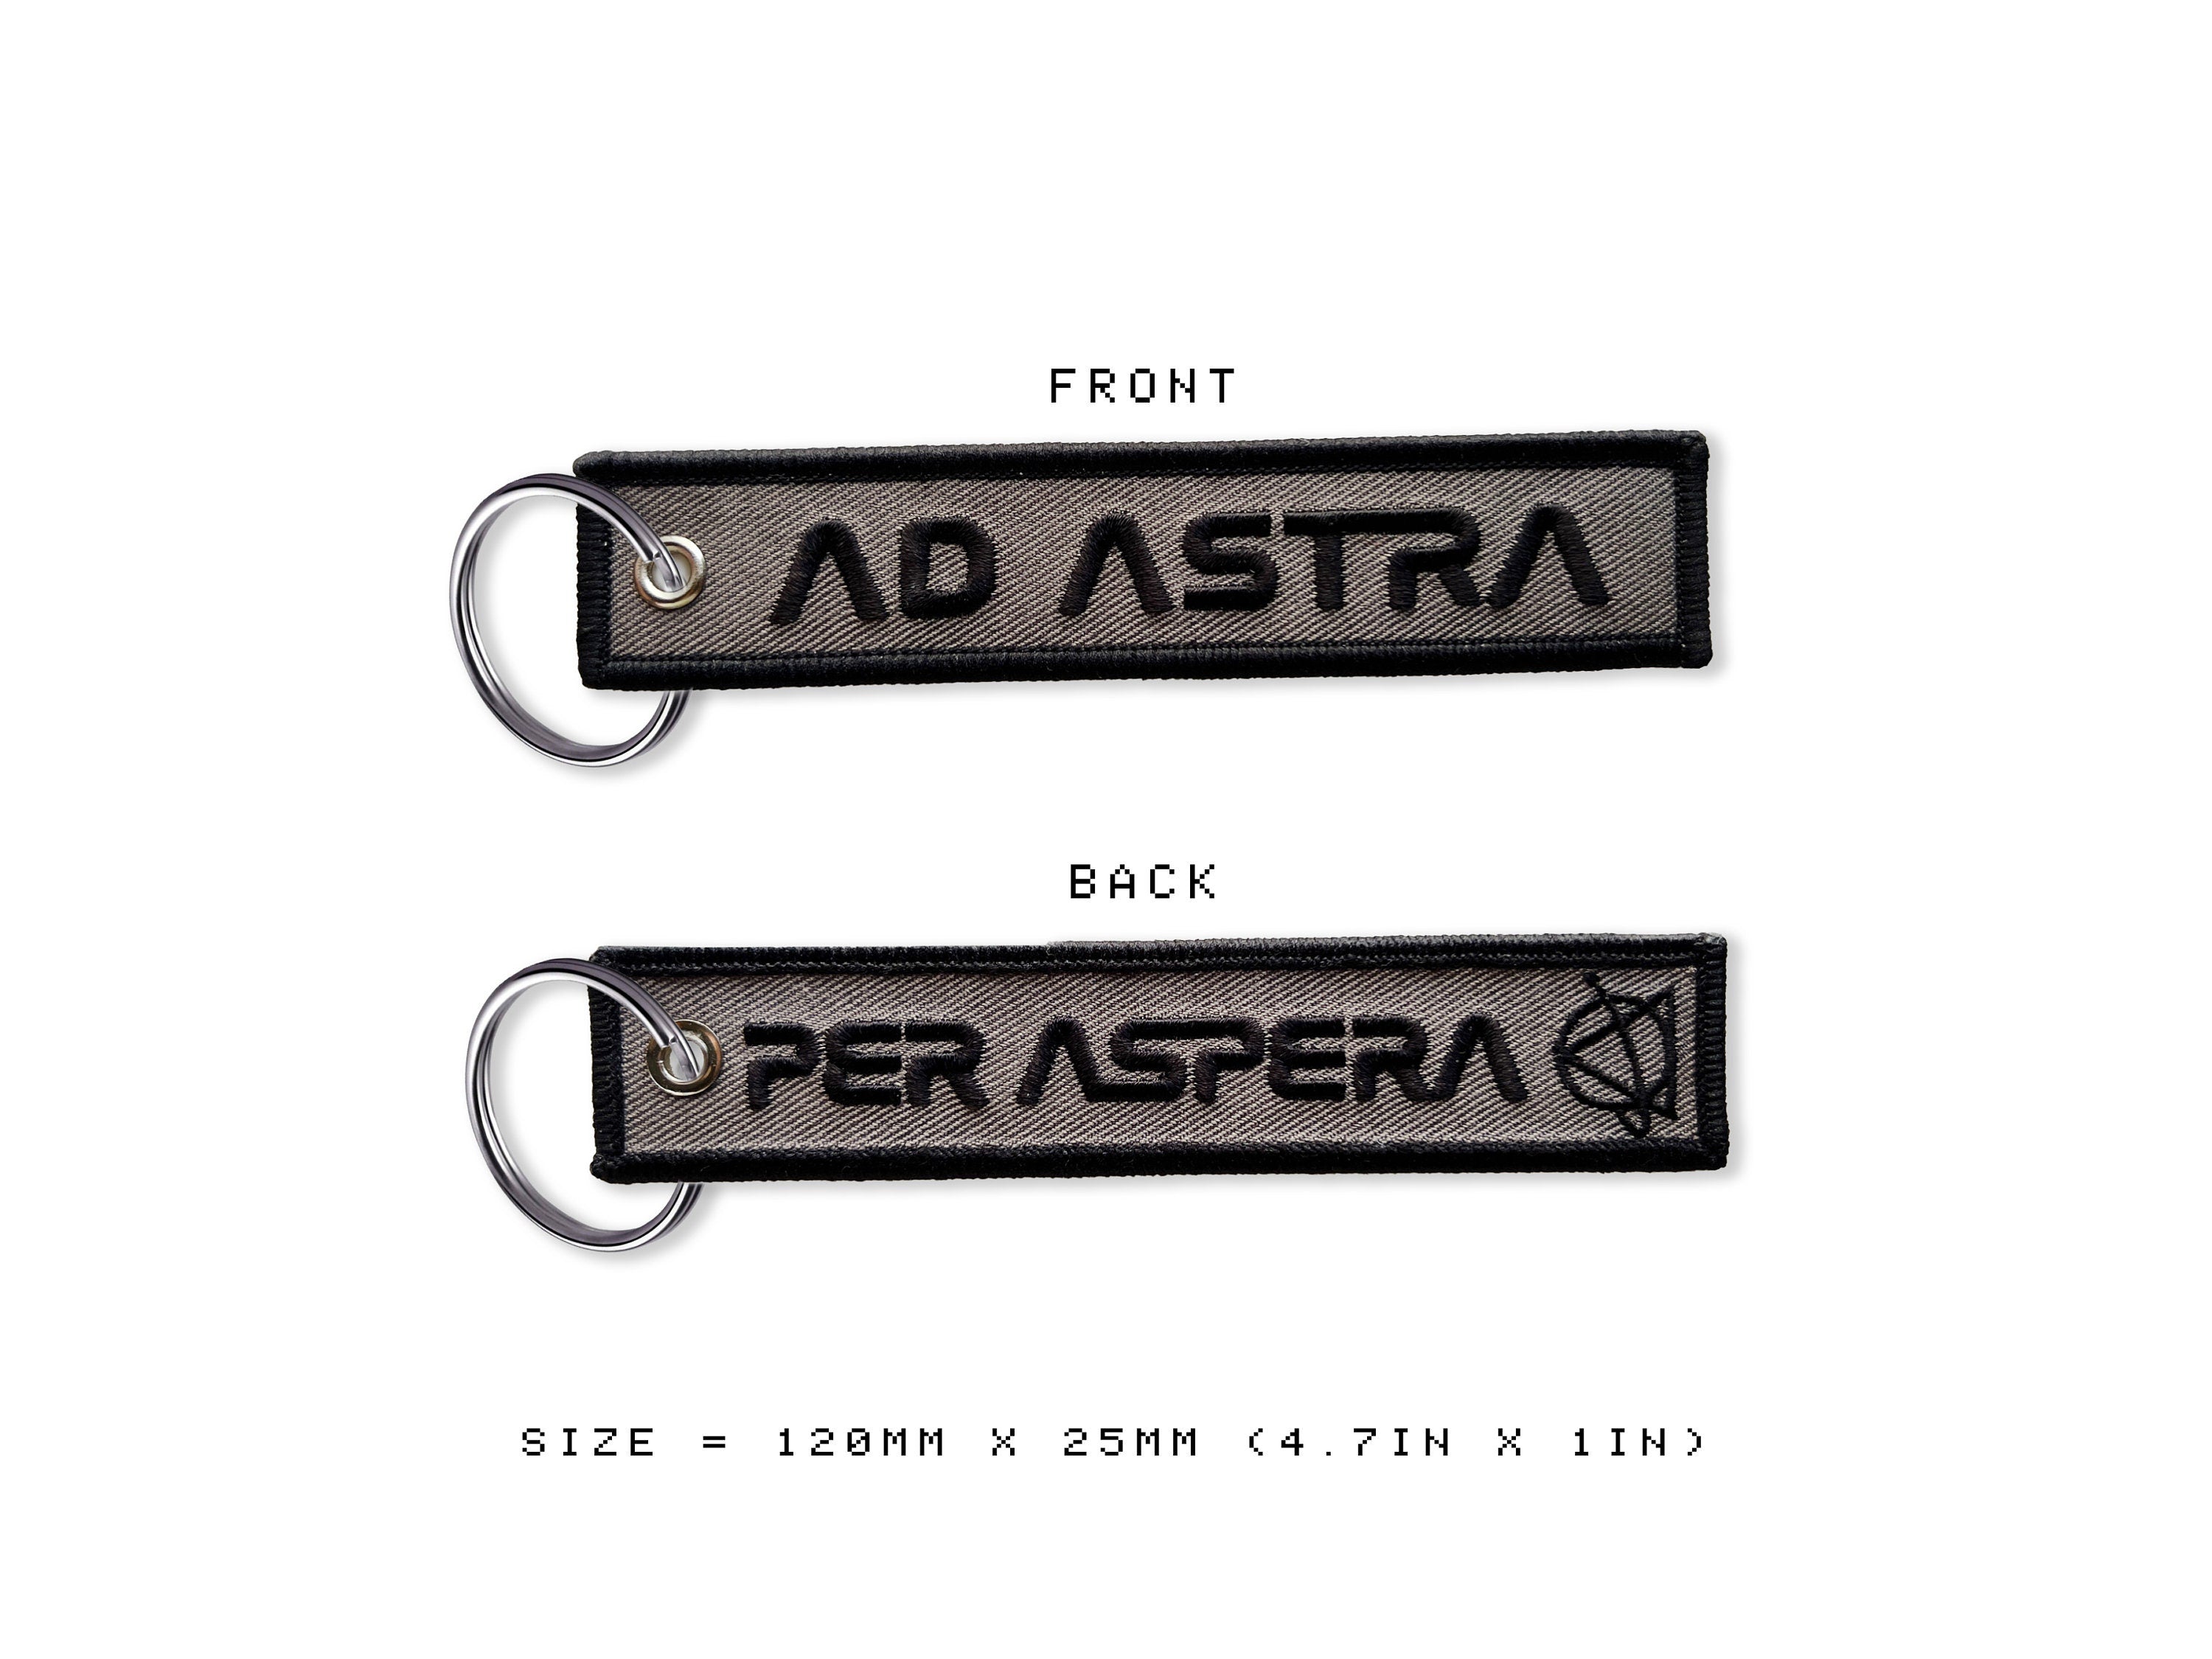 Ad Astra "Remove Before Flight" Keychain - Celestial / Space EDC Keychain - Sci-Fi Geekery / To The Stars